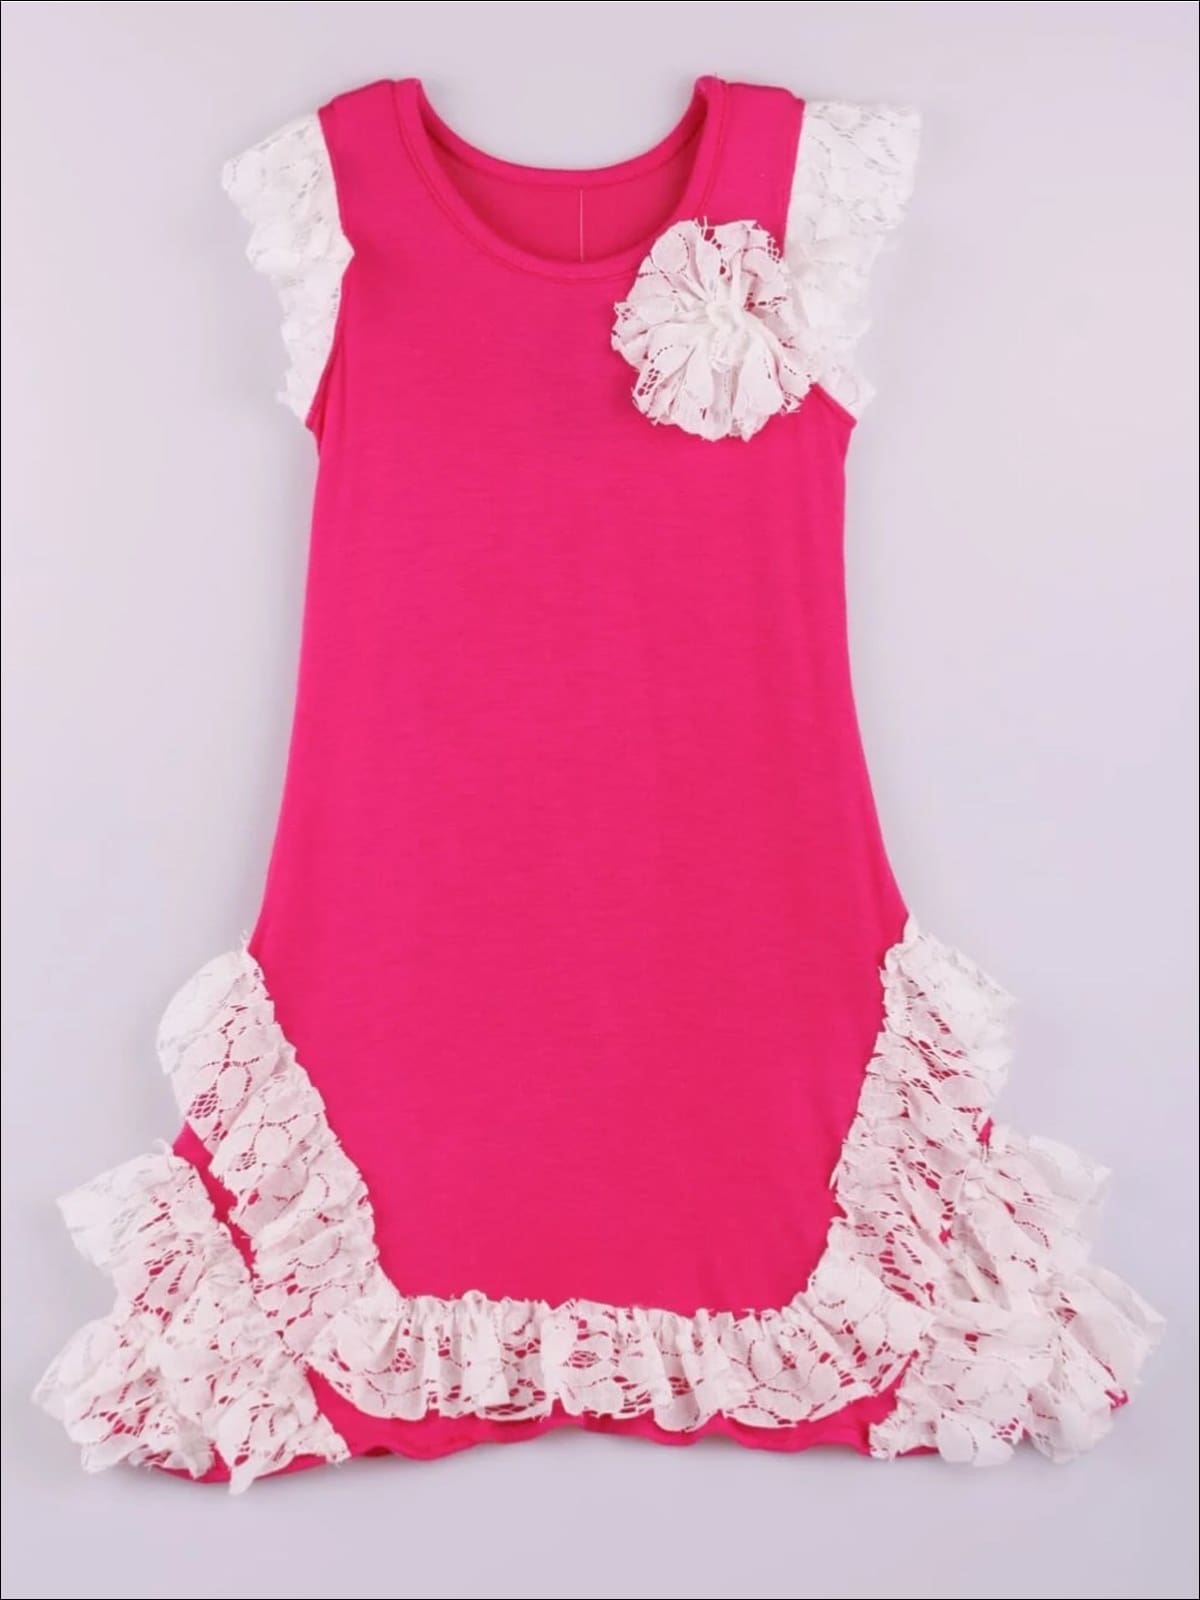 Girls Pink Lace Ruffle Dress - Red/Pink / 3T - Girls Spring Casual Dress